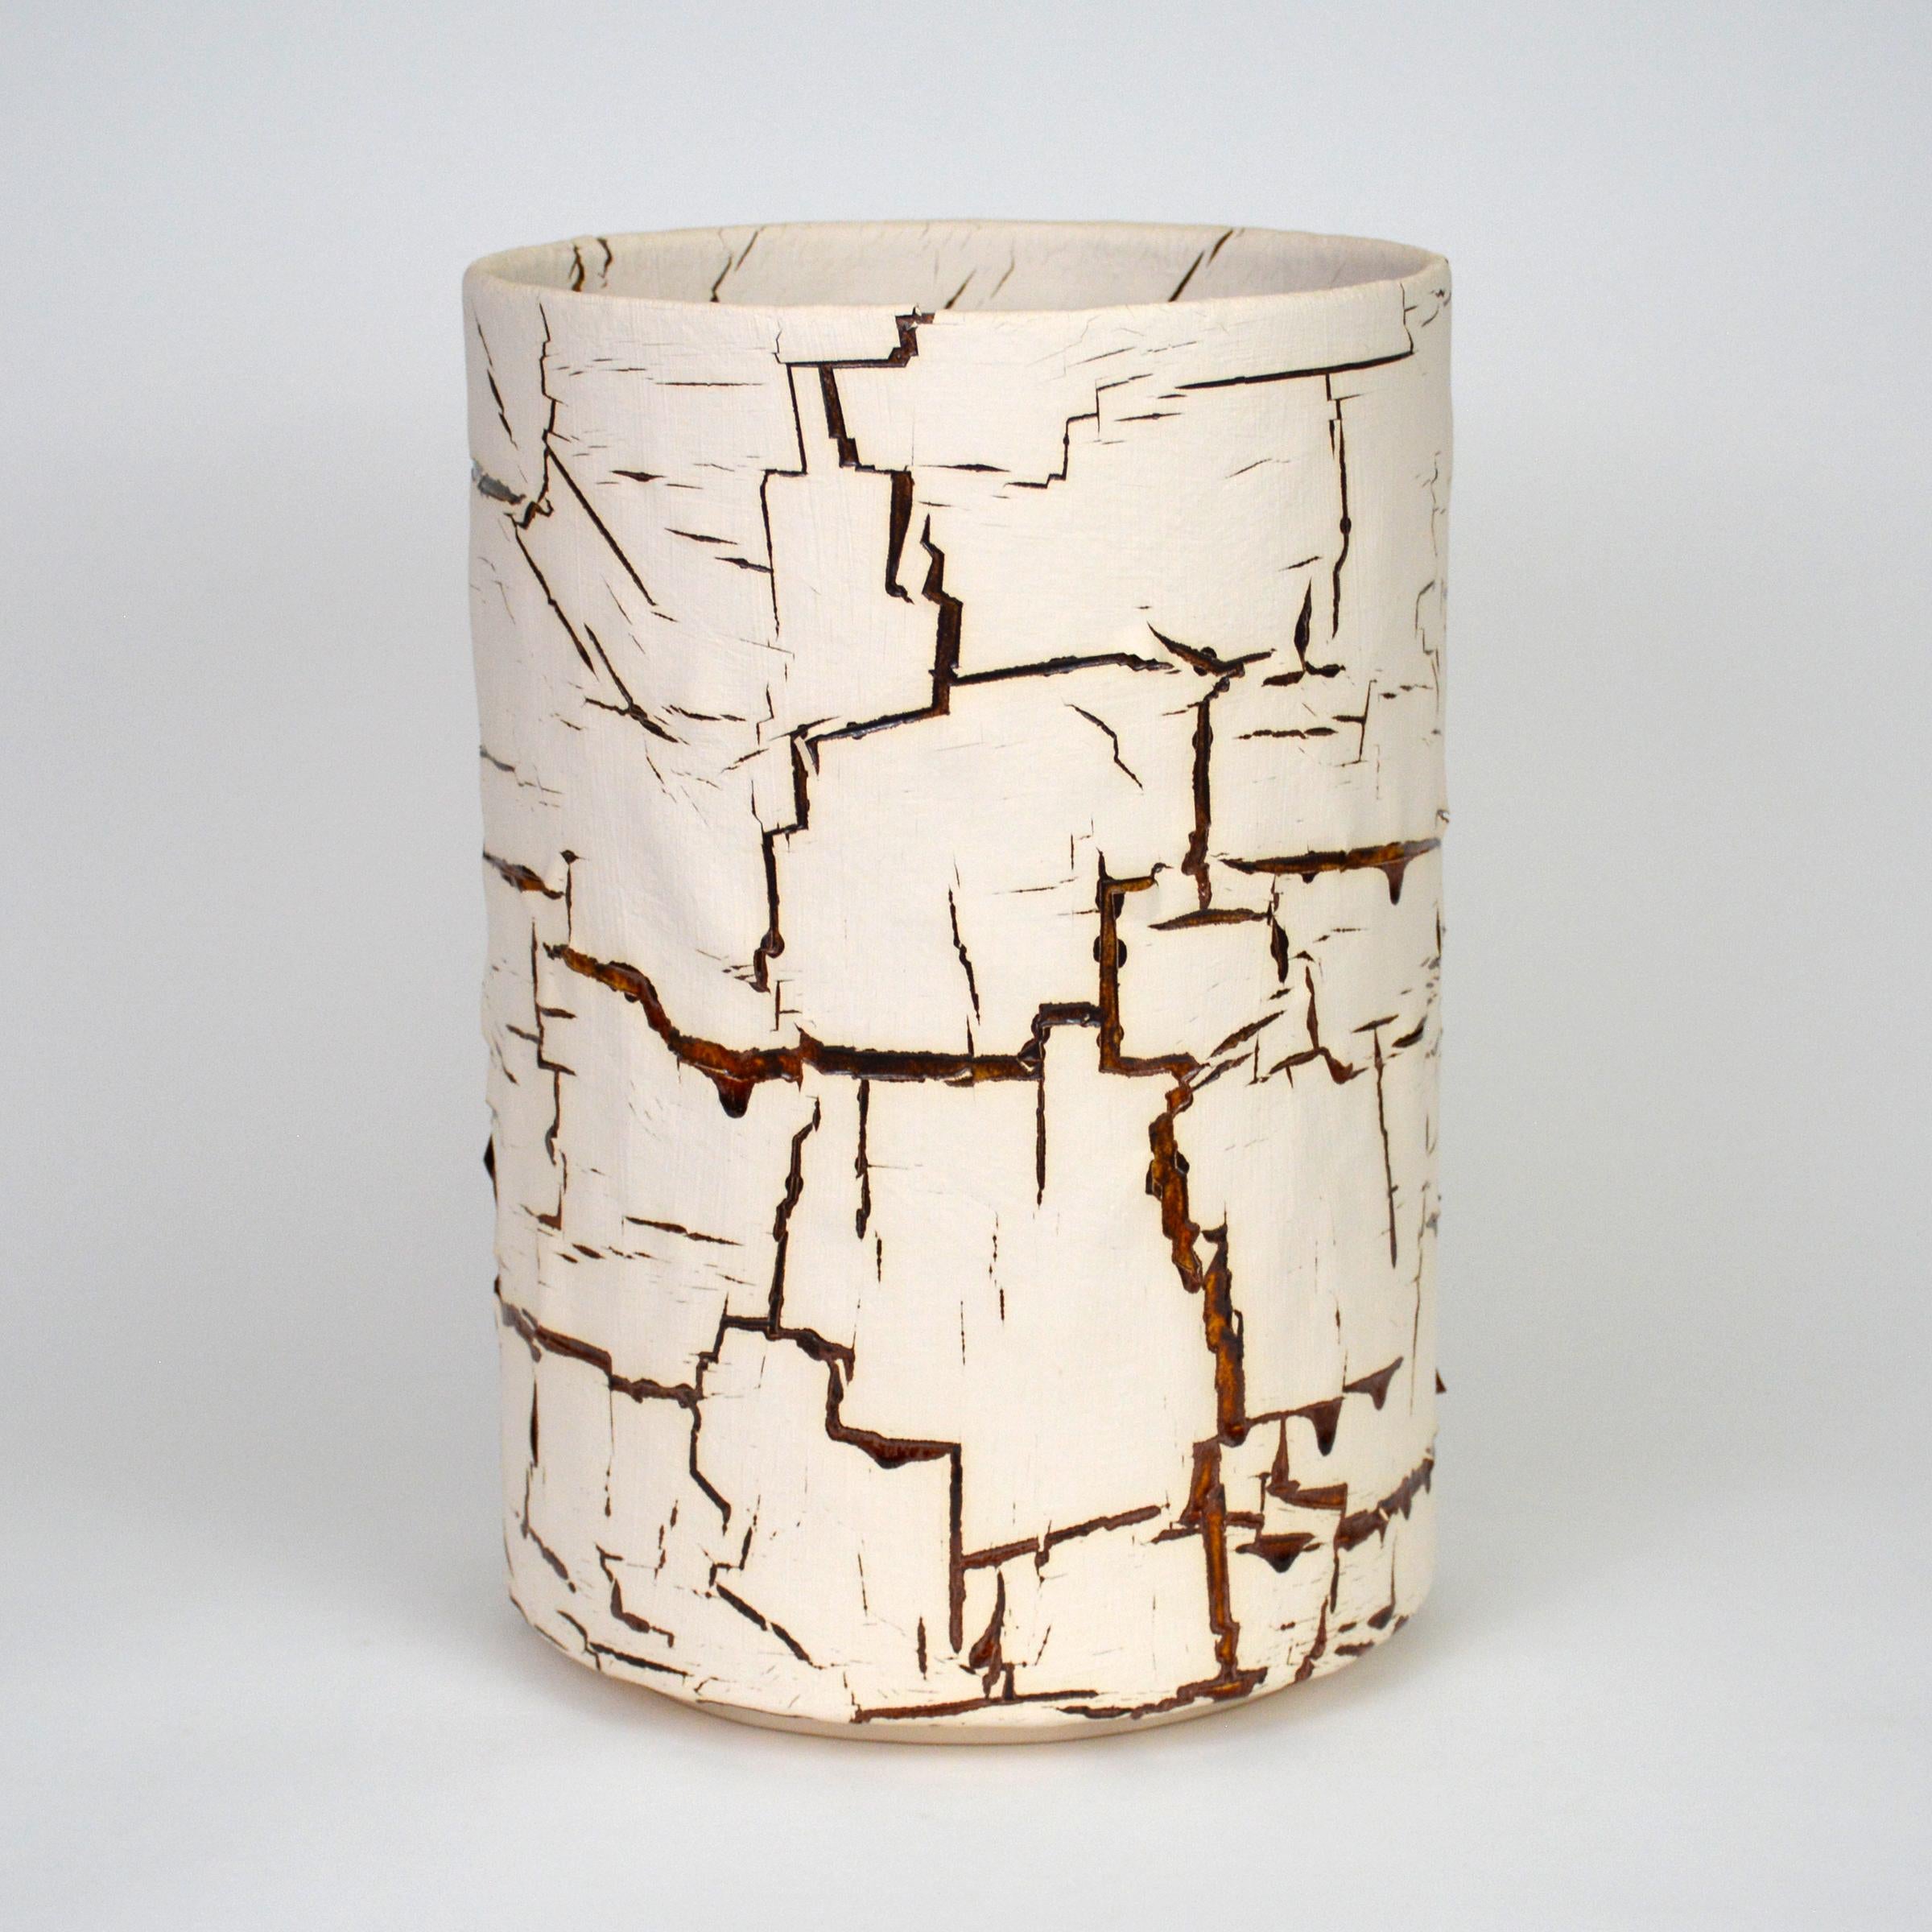 Glazed ceramic cylindrical sculpture by William Edwards
Hand built earthenware vessel, fired multiple times to achieve a textured surface of random abstraction, White matte with amber gloss glaze breaking through.

William received his BFA in